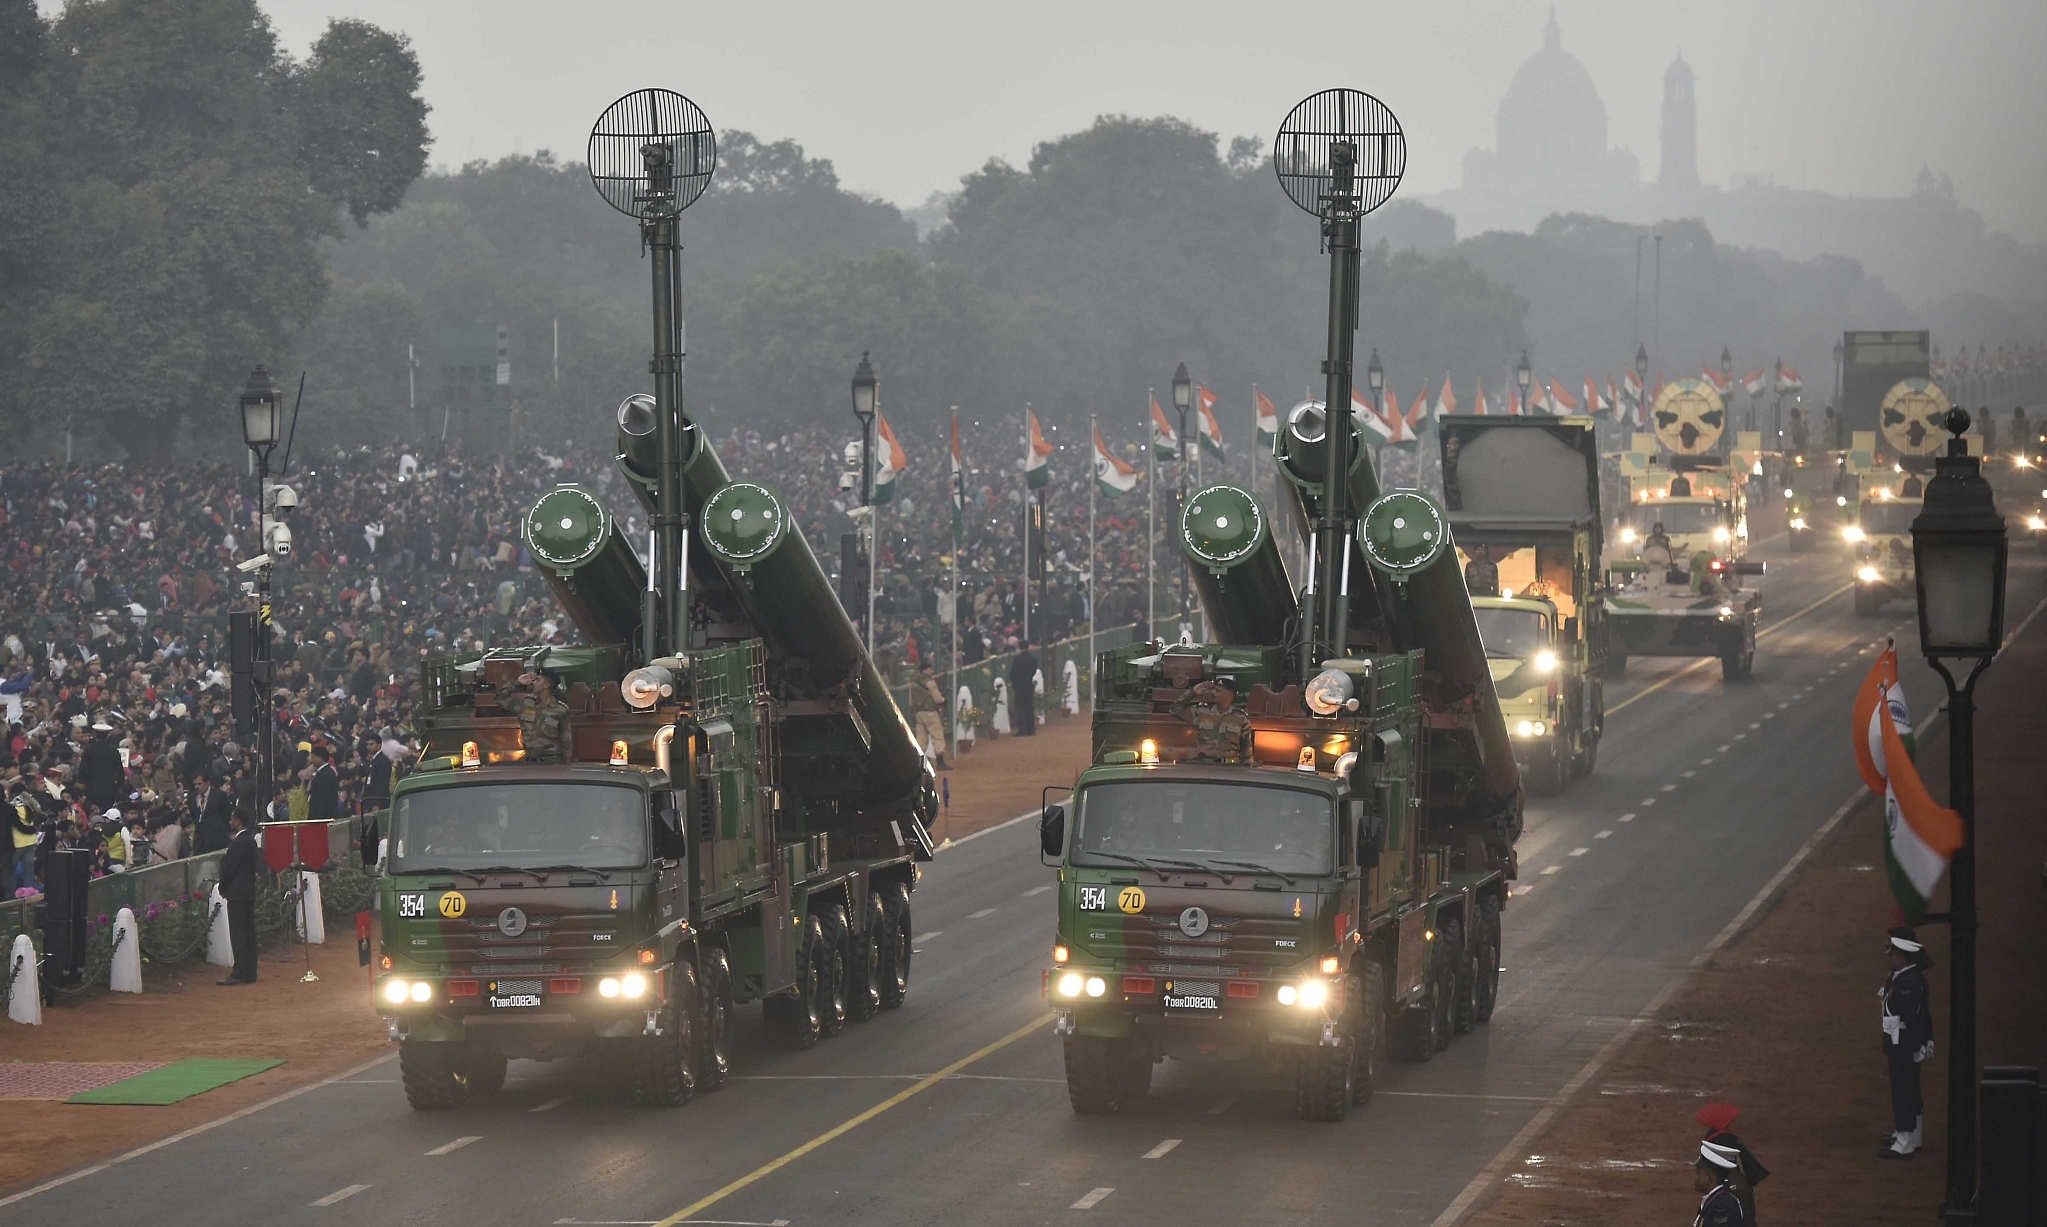 Brahmos Weapon System during the celebration of the 68th Republic Day. (Raj K Raj/Hindustan Times via Getty Images)